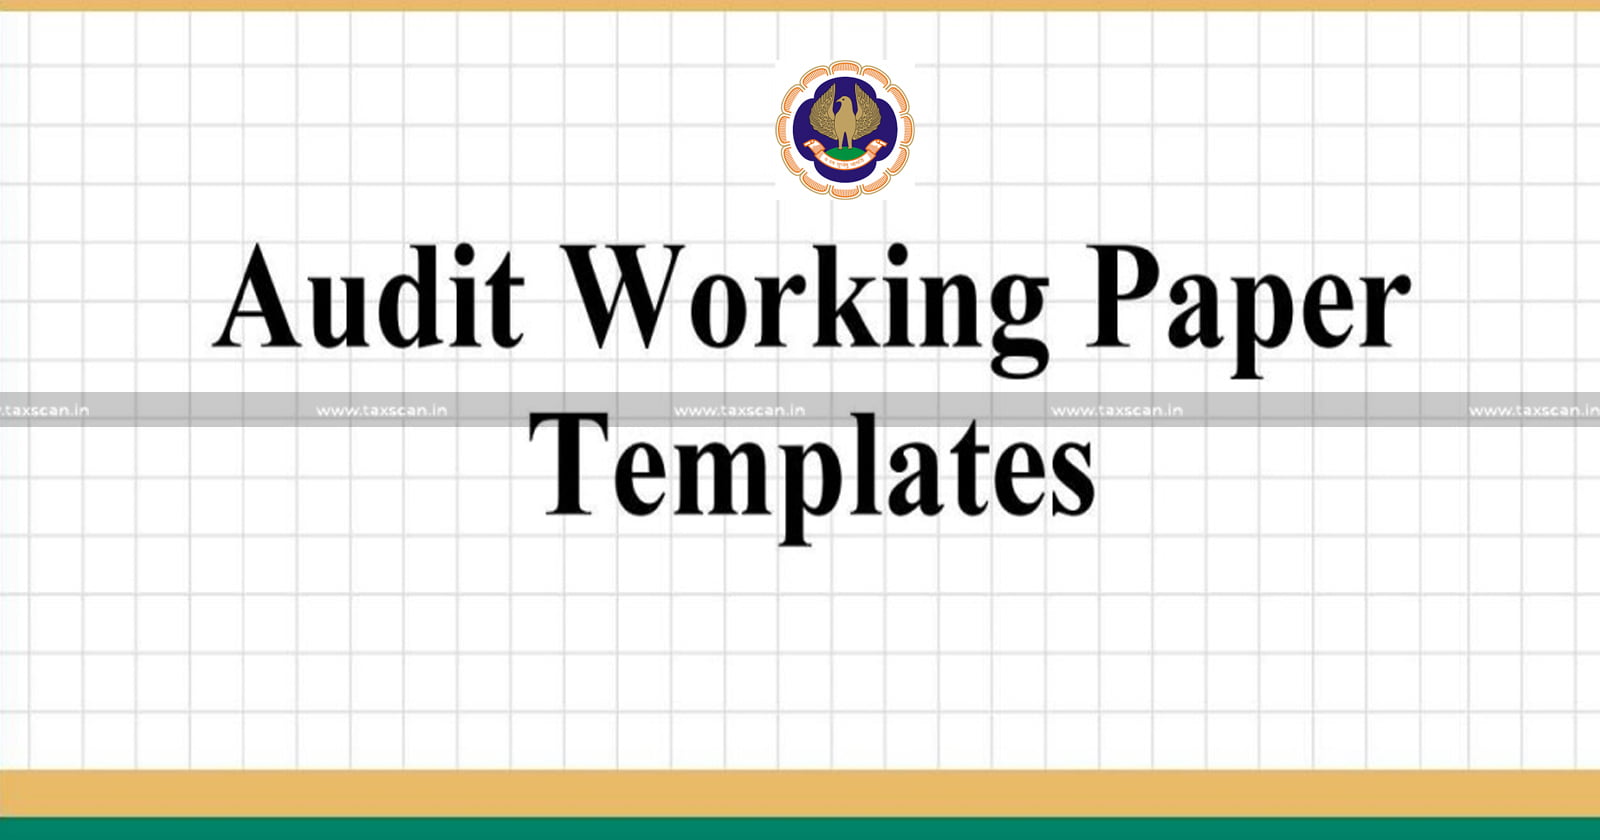 ICAI - releases - Audit - Working - Paper - Templates - TAXSCAN